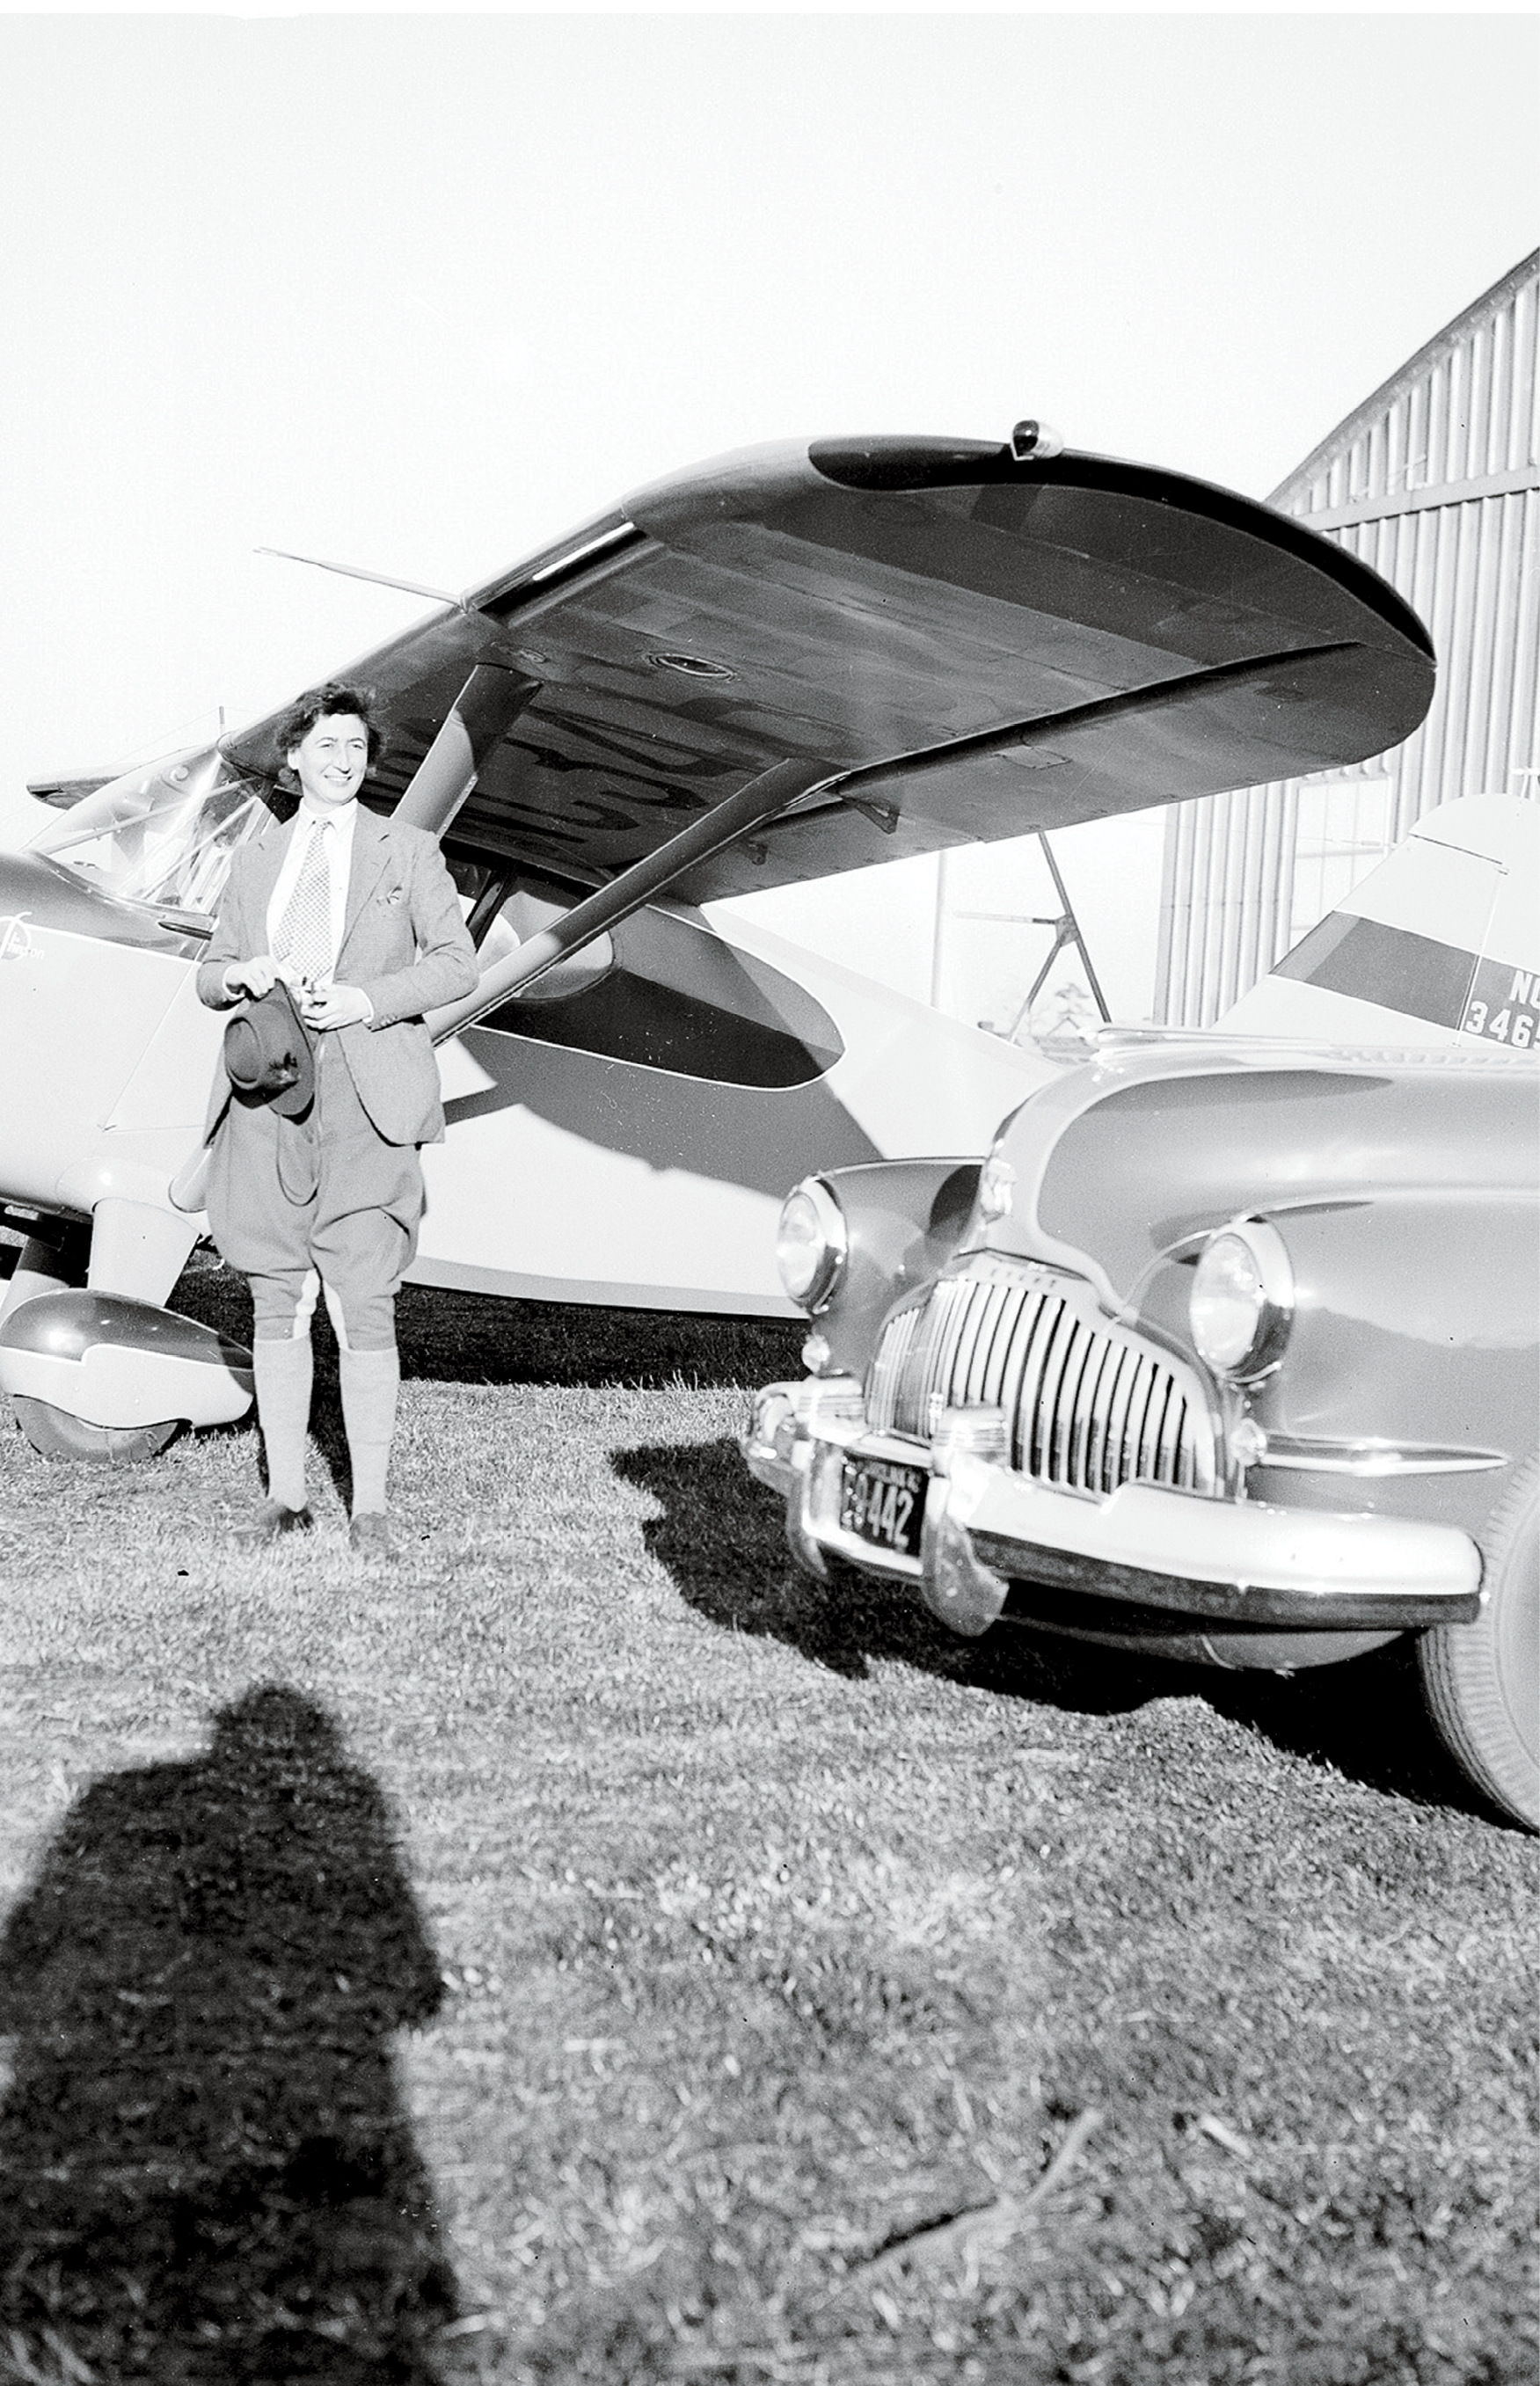 Belle at her airport hangar in Georgetown, South Carolina, in 1942; the US Army commandeered it and her planes during World War II.